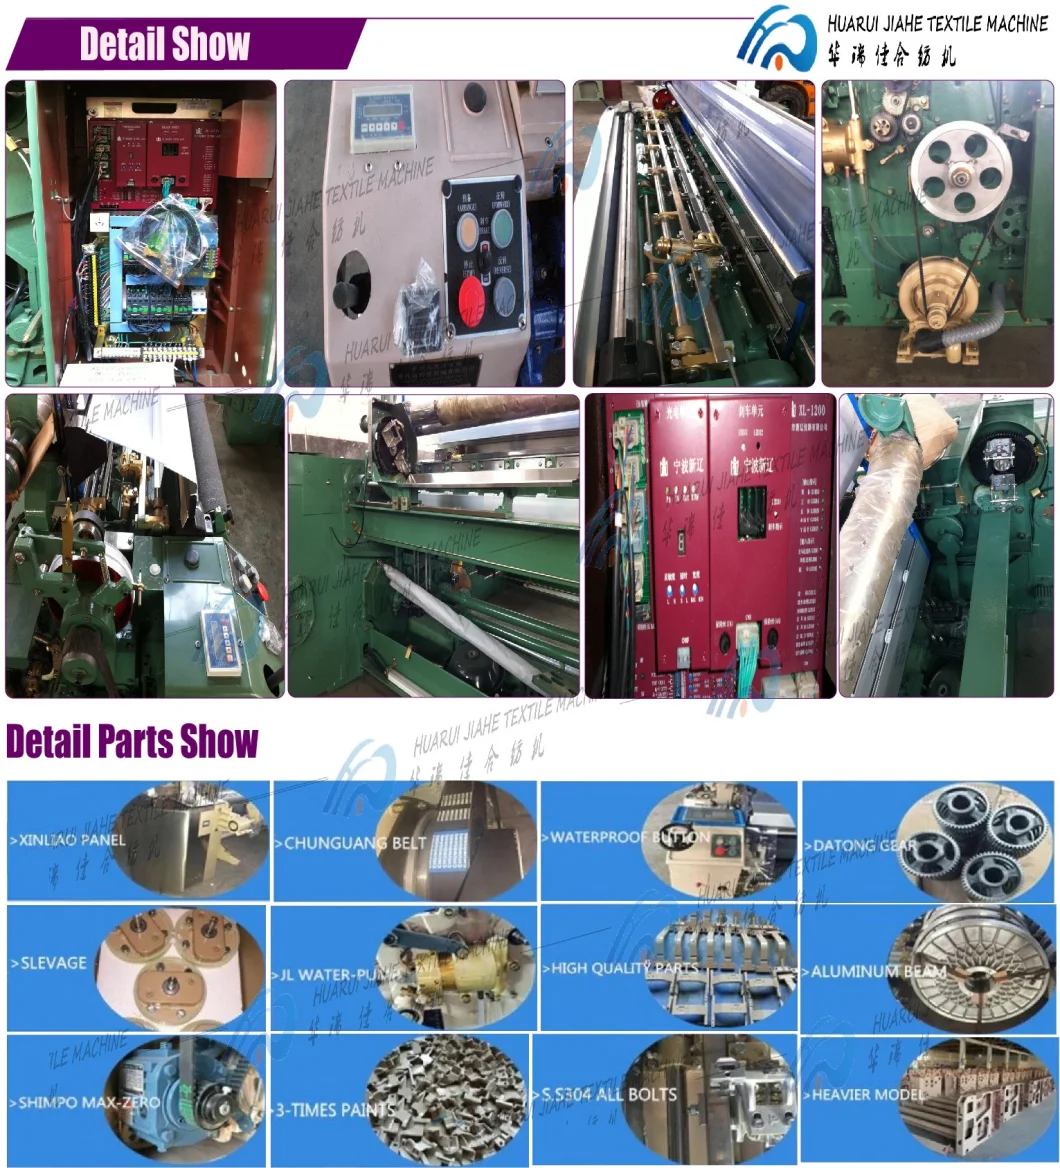 280cm, Double Nozzle, Textile Machine Water Jet Loom in Weaving Machines/ Water Jet Loom Spare Parts/ Textile Weaving Machine Waterjet Looms Spareparts